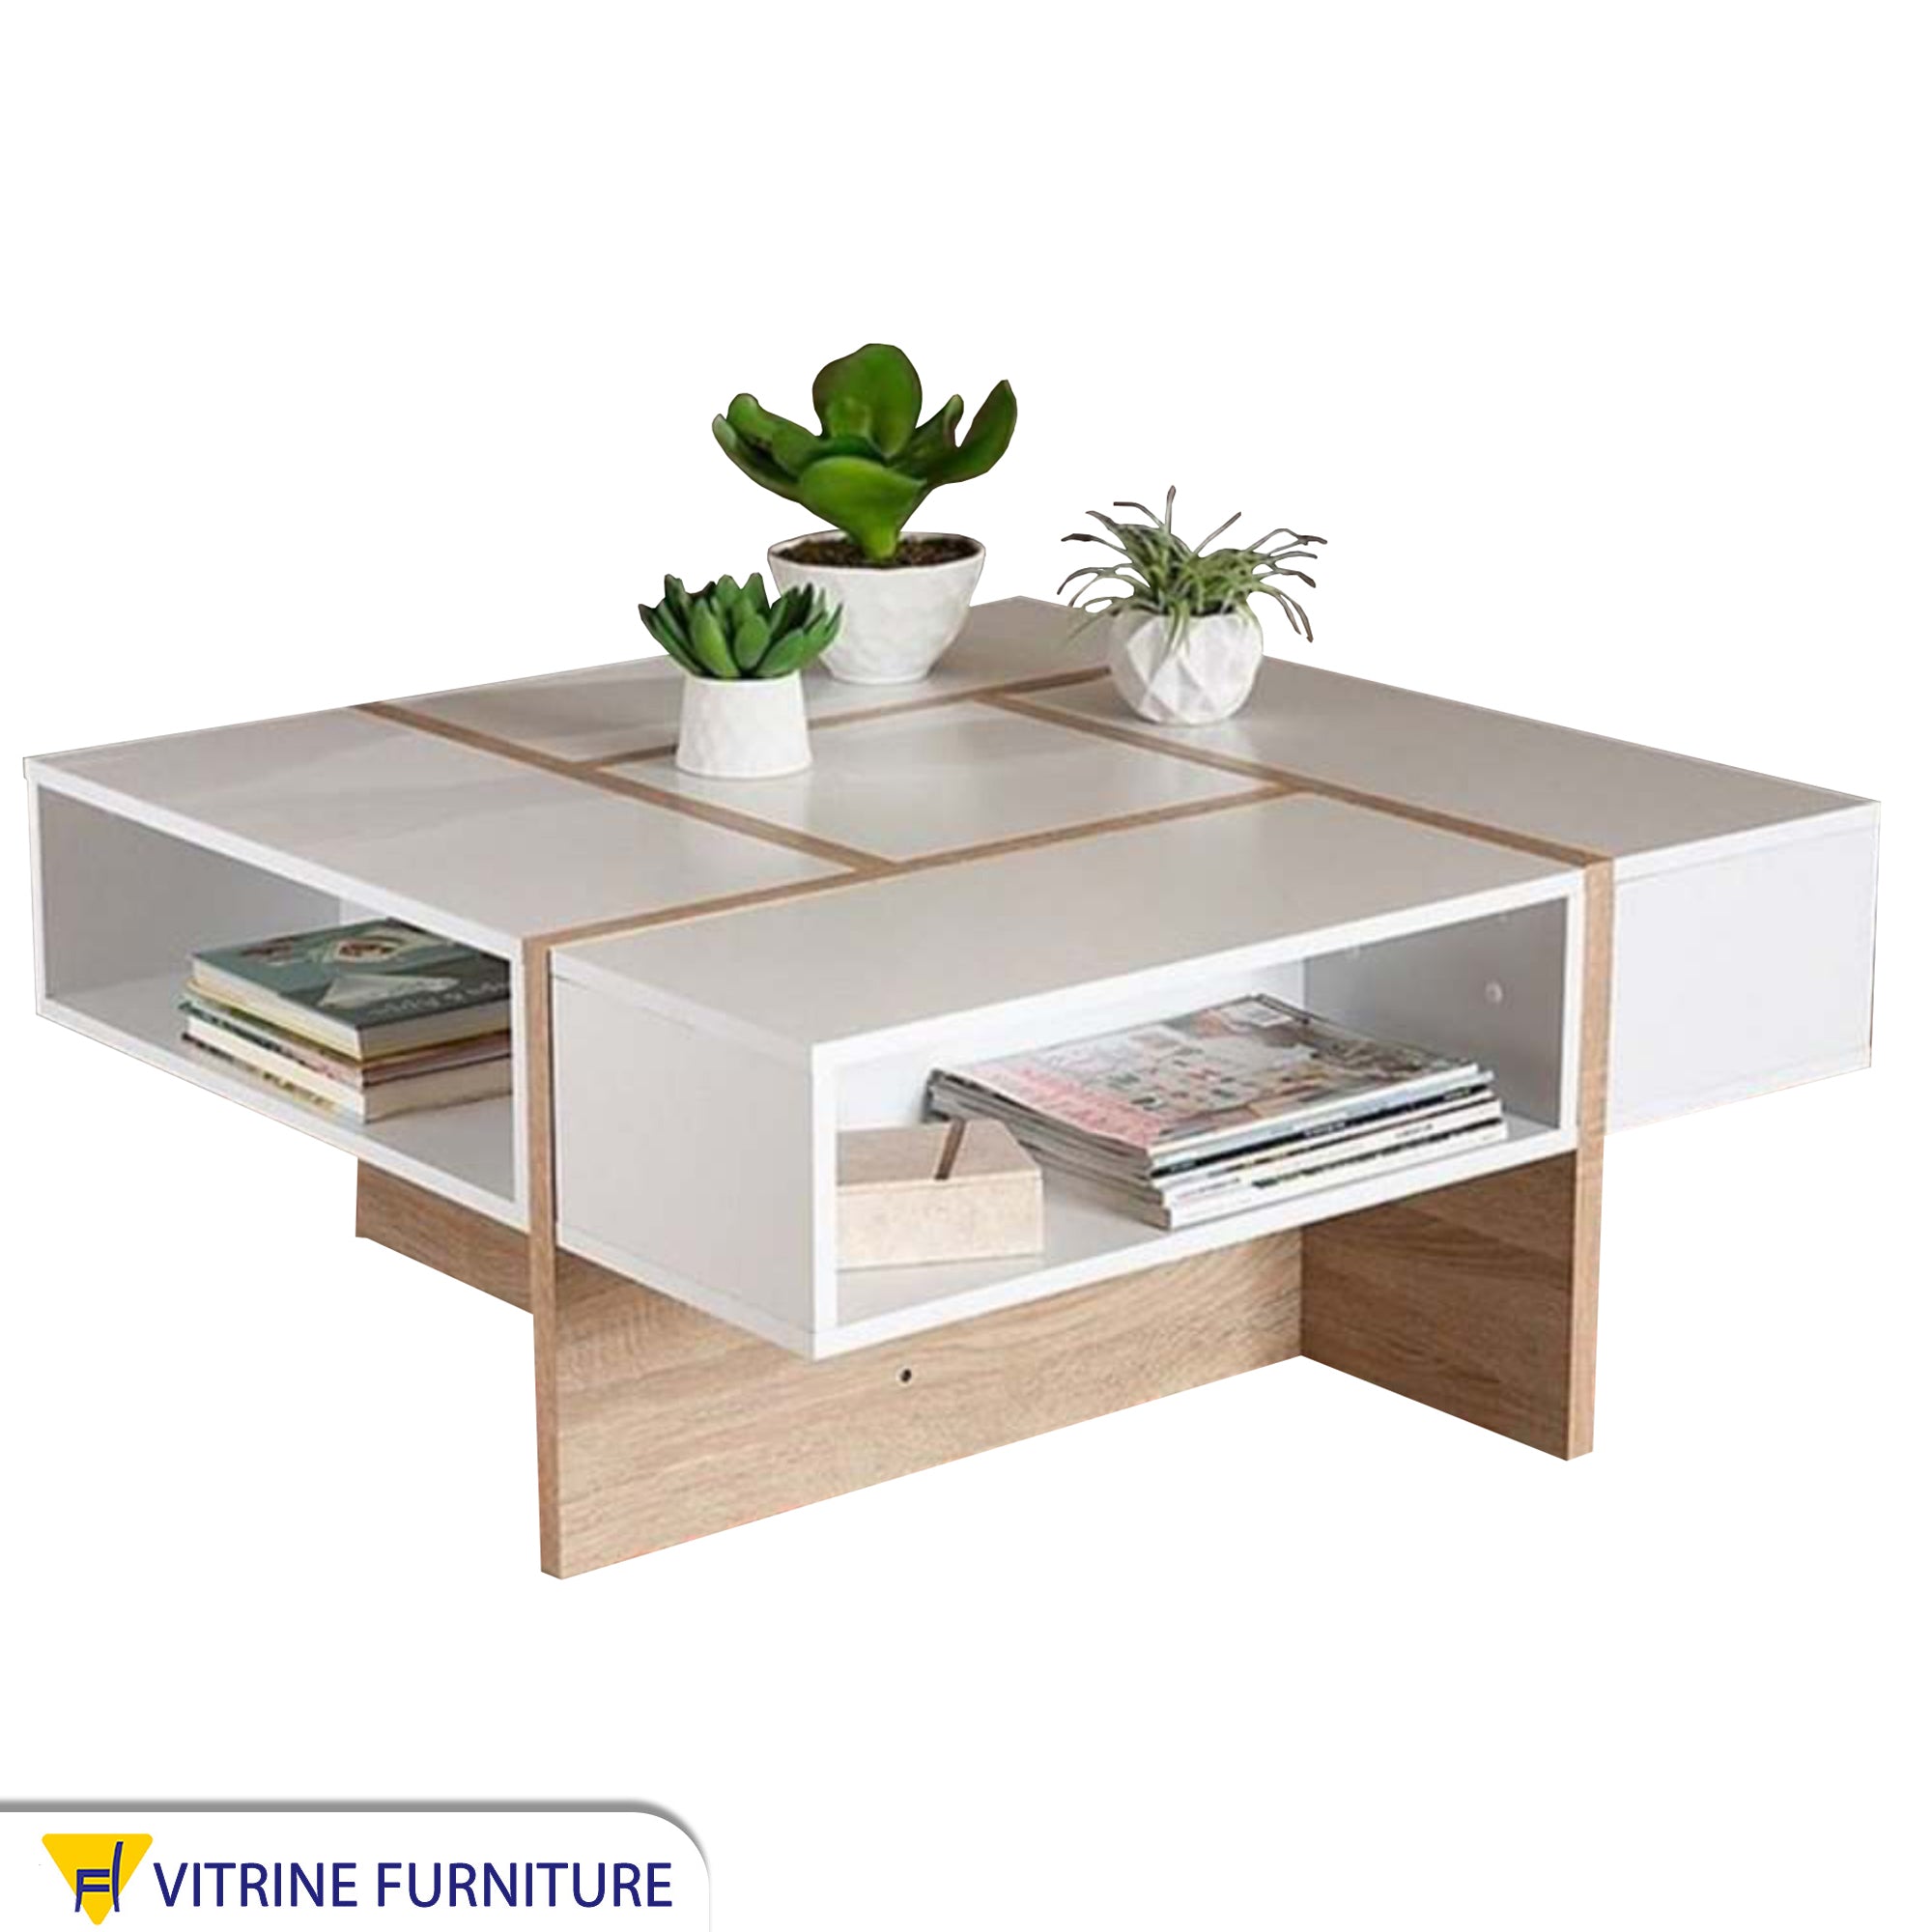 Cube-shaped center table